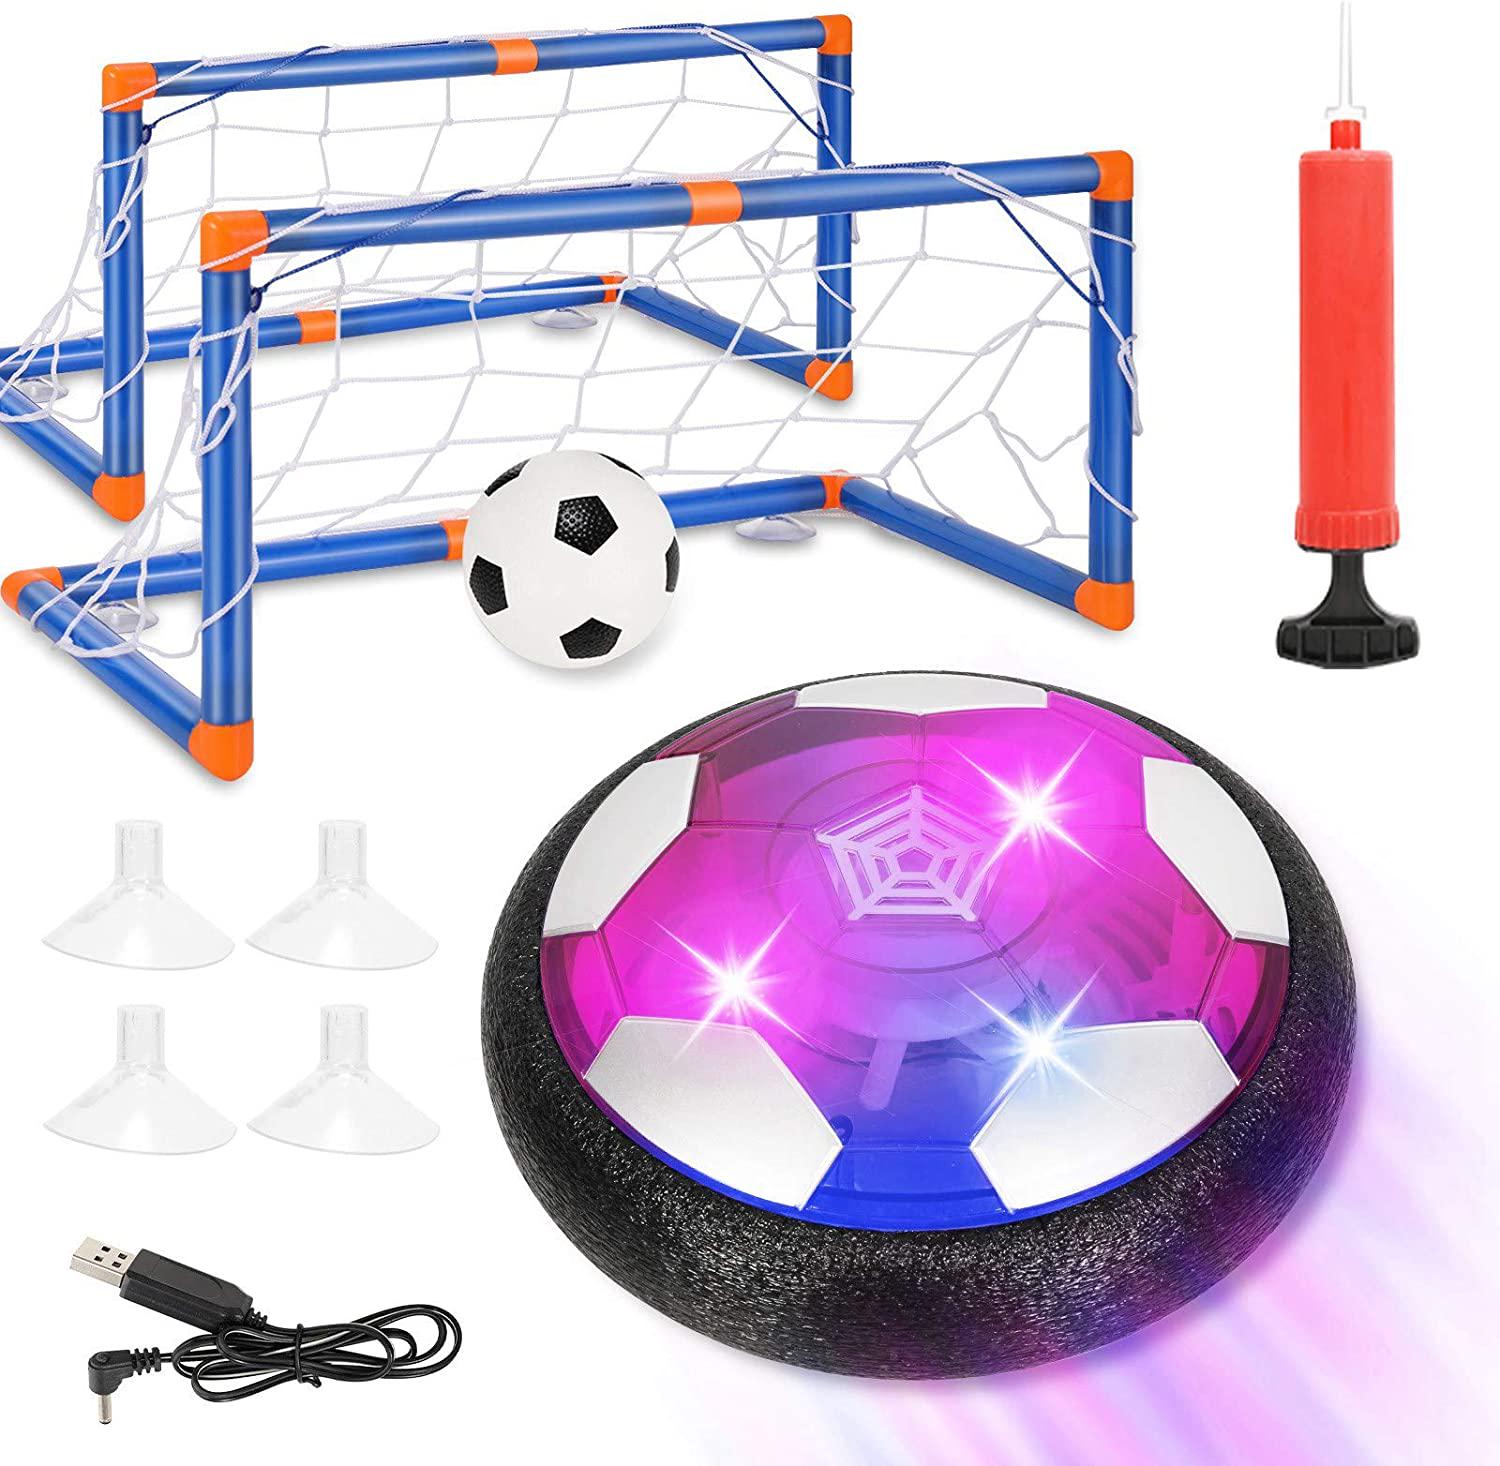 Fixget, Kids Toys Hover Soccer Ball Set with 2 Goals, Fixget Rechargeable USB Floating Air Soccer with LED Light and Upgraded Bumper, Perfect Time Killer for Boys Girls Indoor Games Birthday Christmas Party